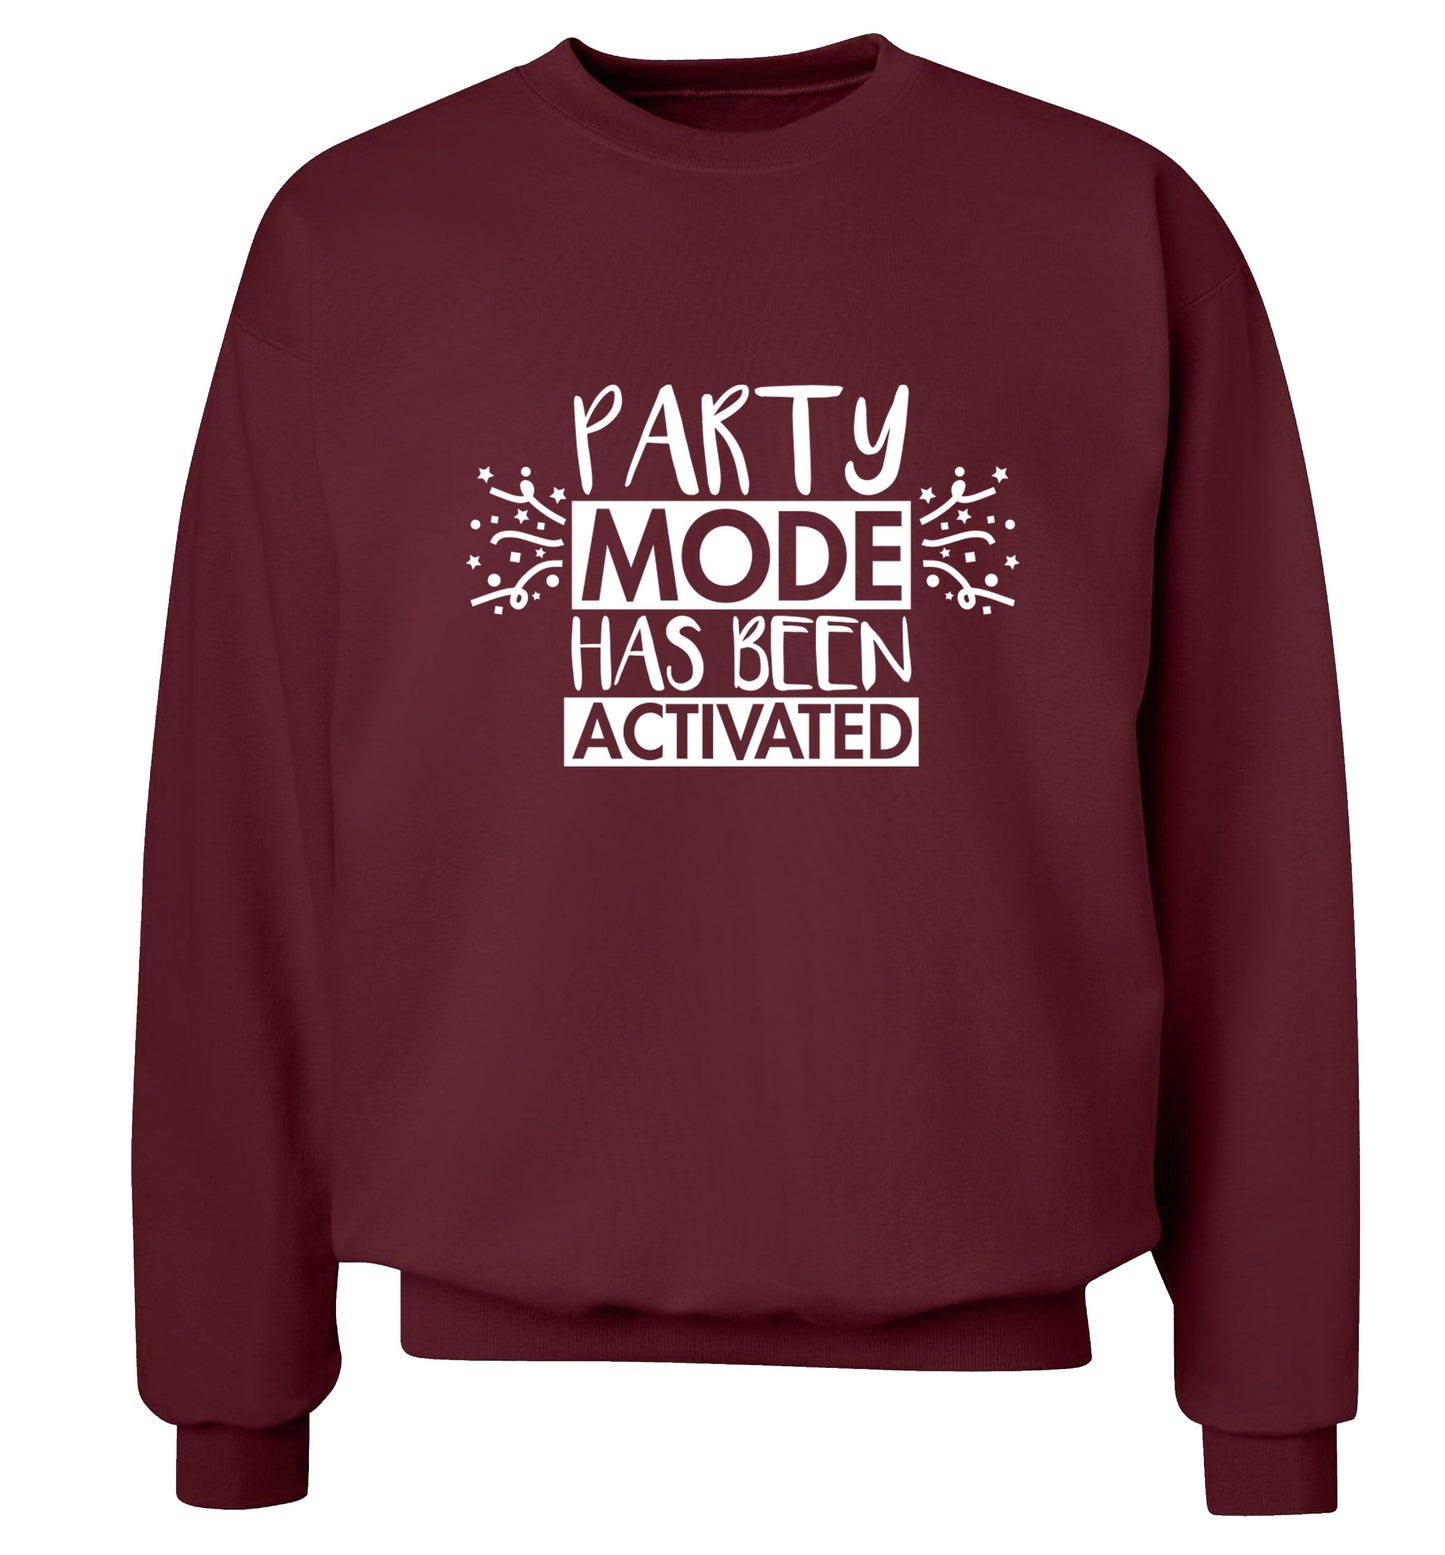 Please do not disturb party mode has been activated Adult's unisex maroon Sweater 2XL